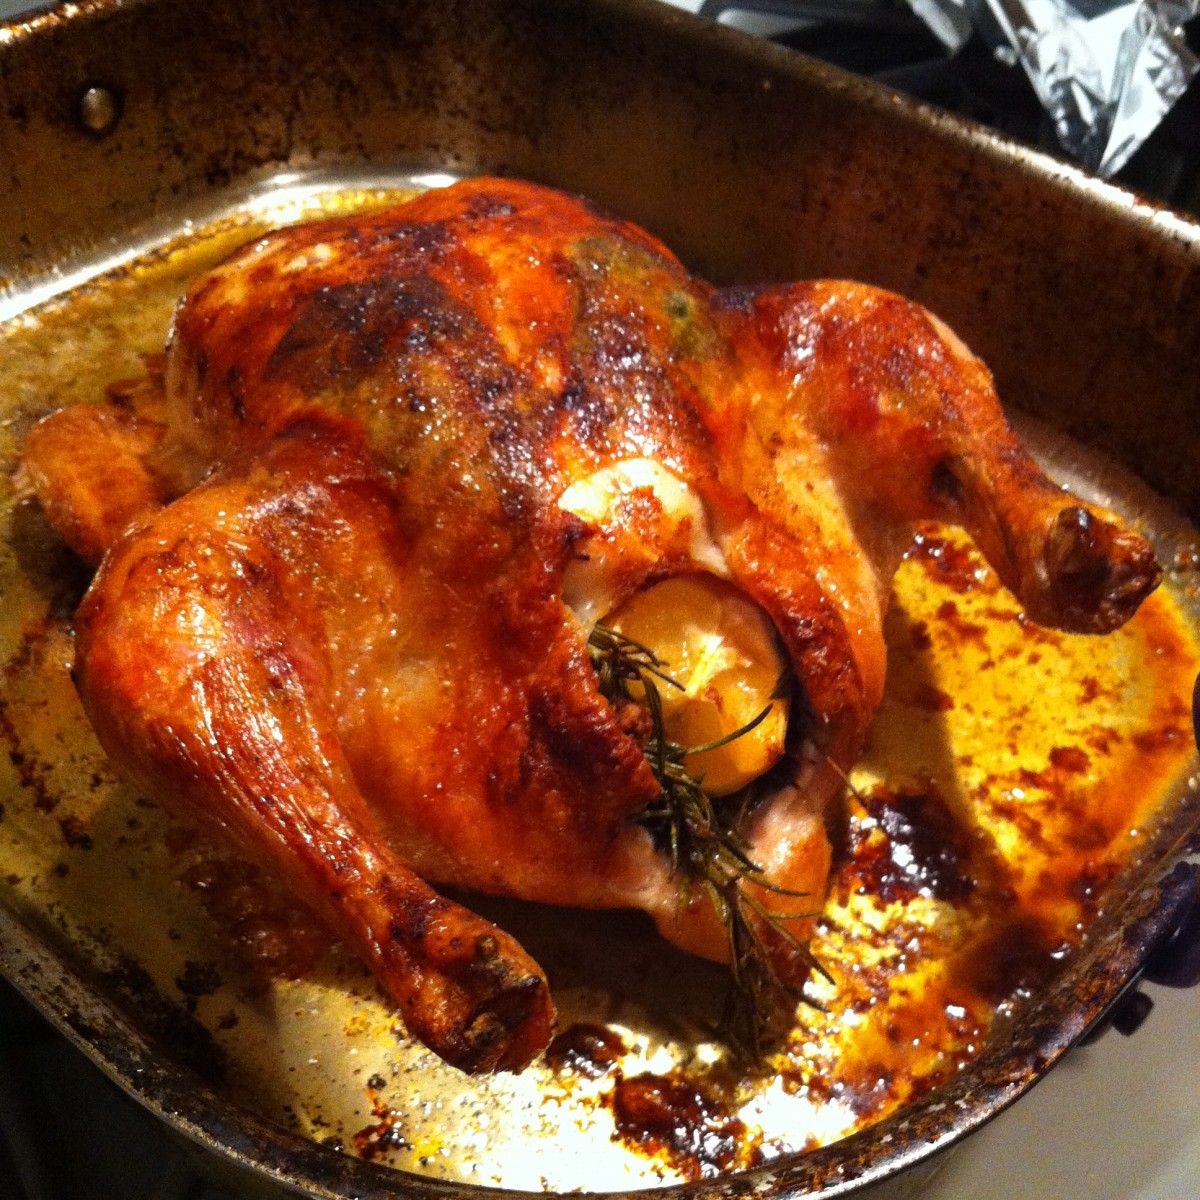 How to Make the Perfect Roasted Chicken